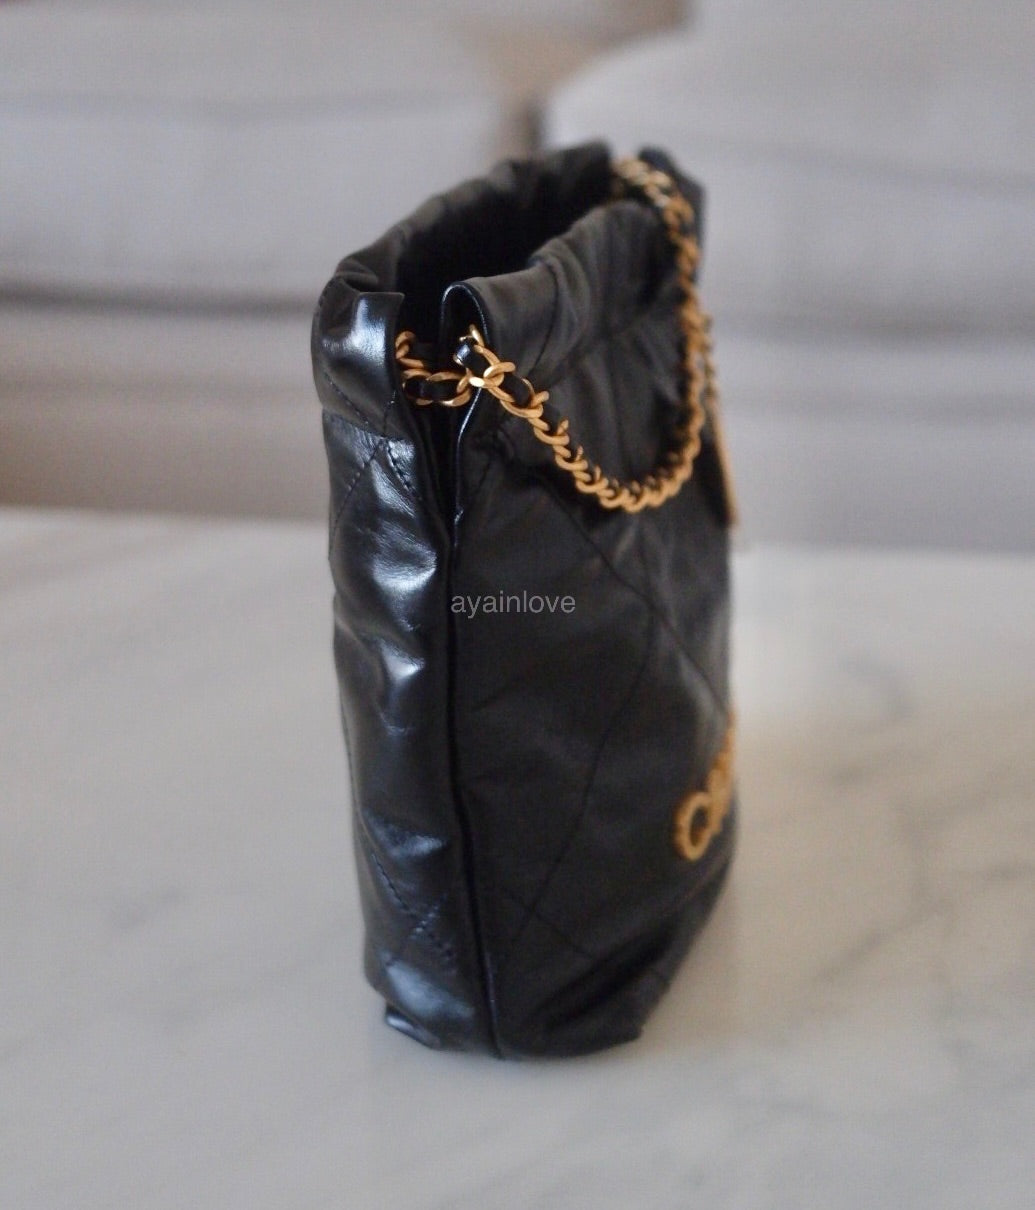 Chanel Black Quilted Shiny Calfskin Small Chanel 22 Bag For Sale at 1stDibs